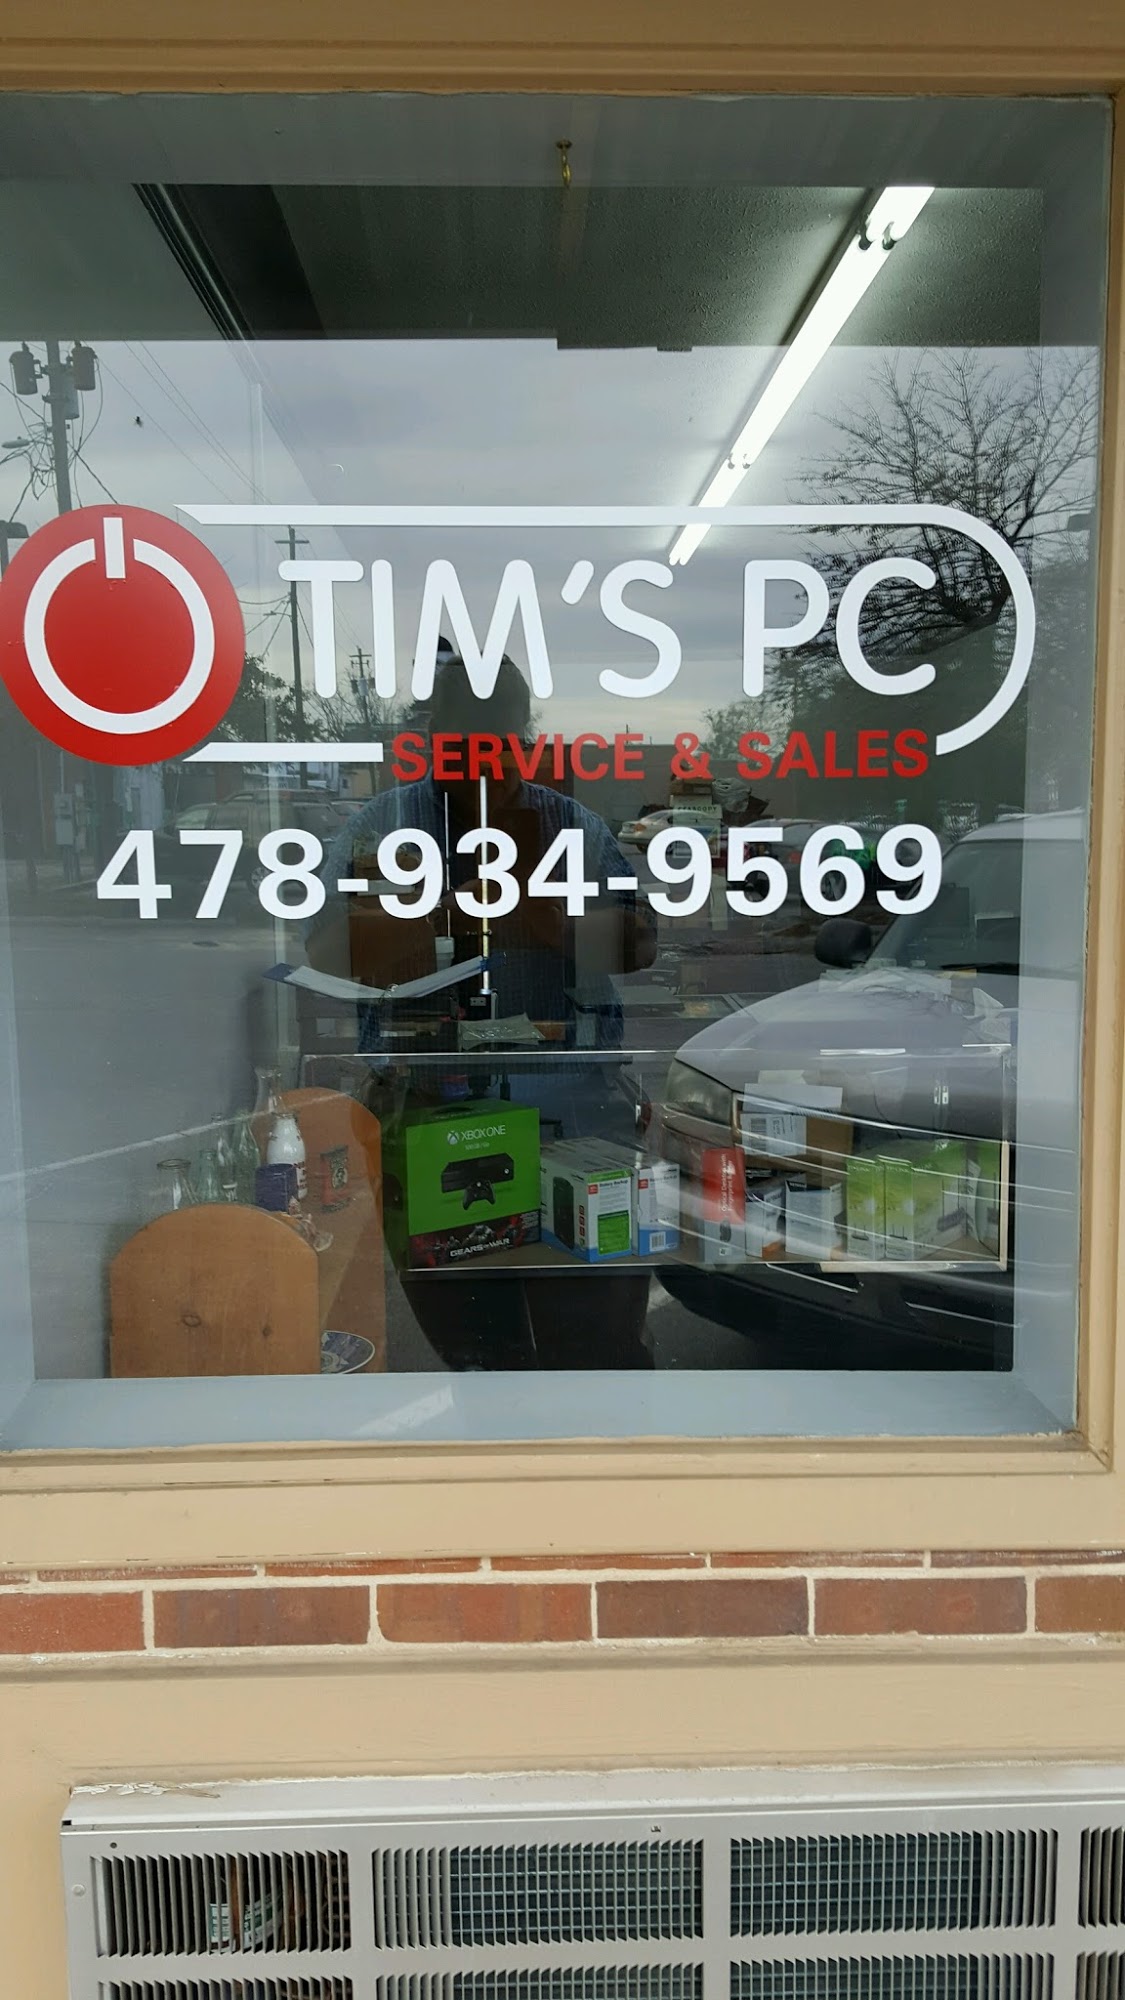 Tim's PC Service and Sales